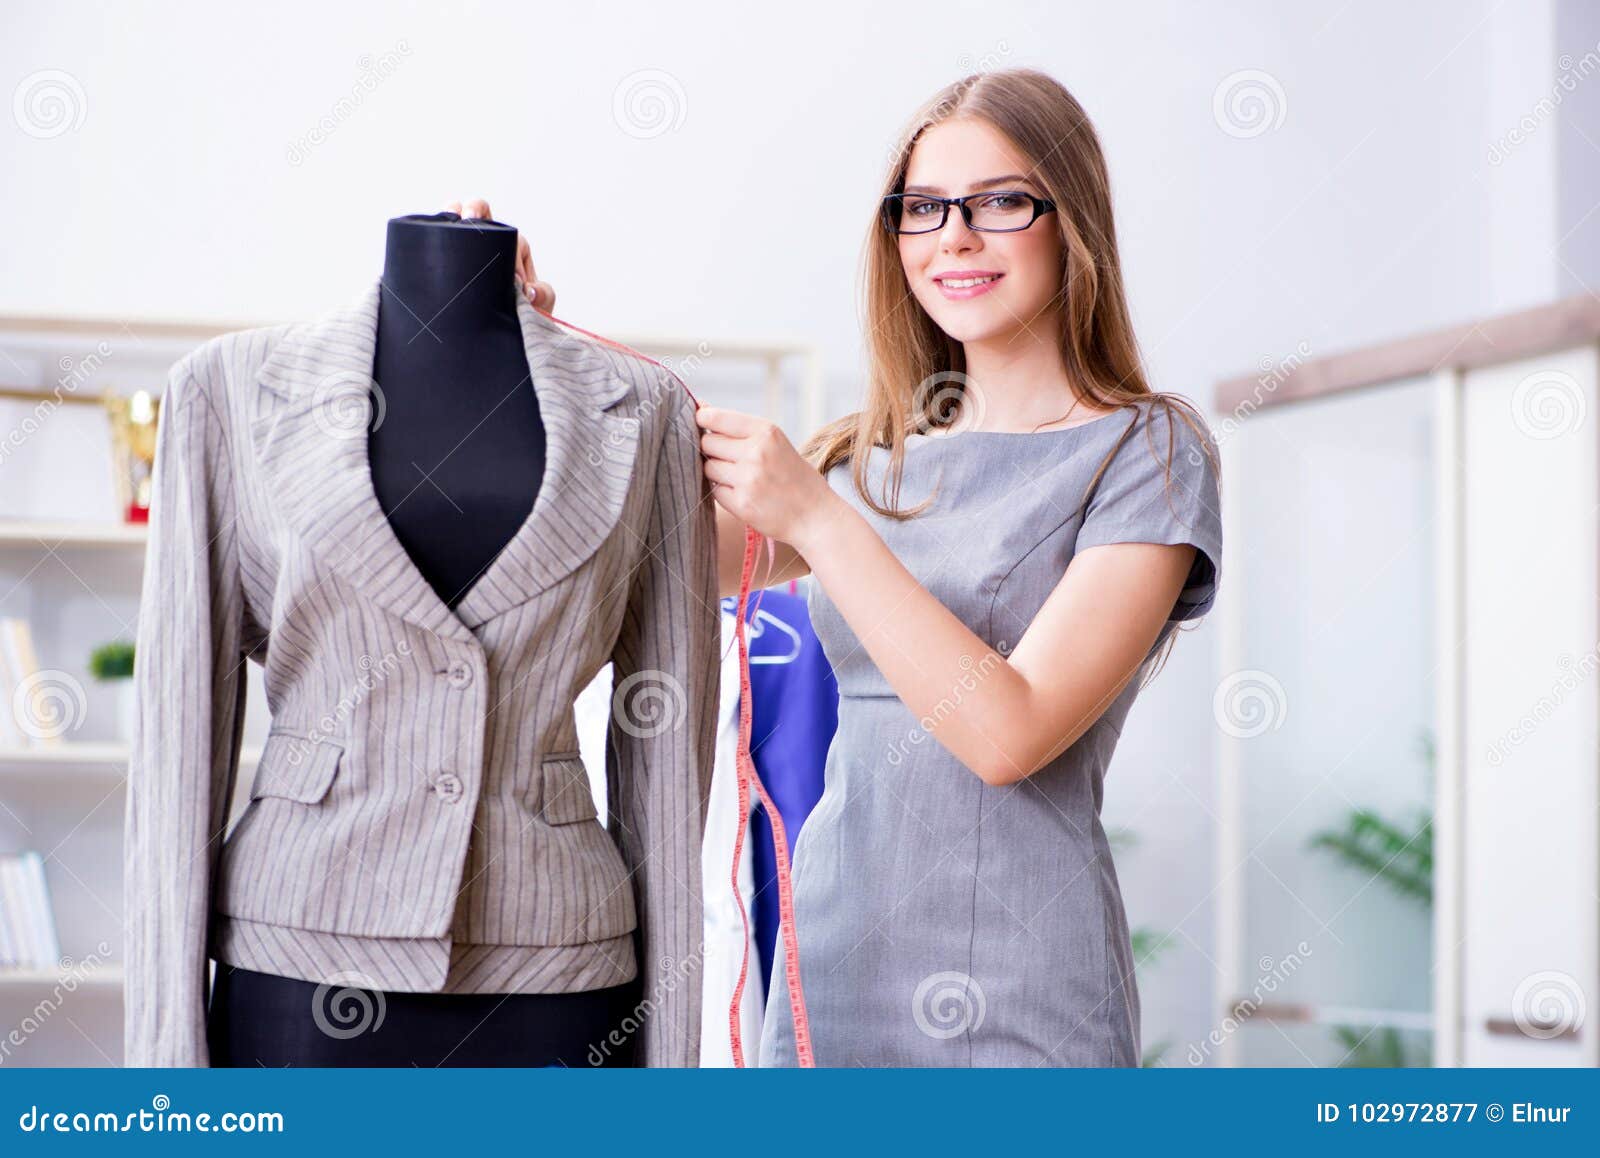 The Young Woman Tailor Working in Workshop on New Dress Stock Image ...